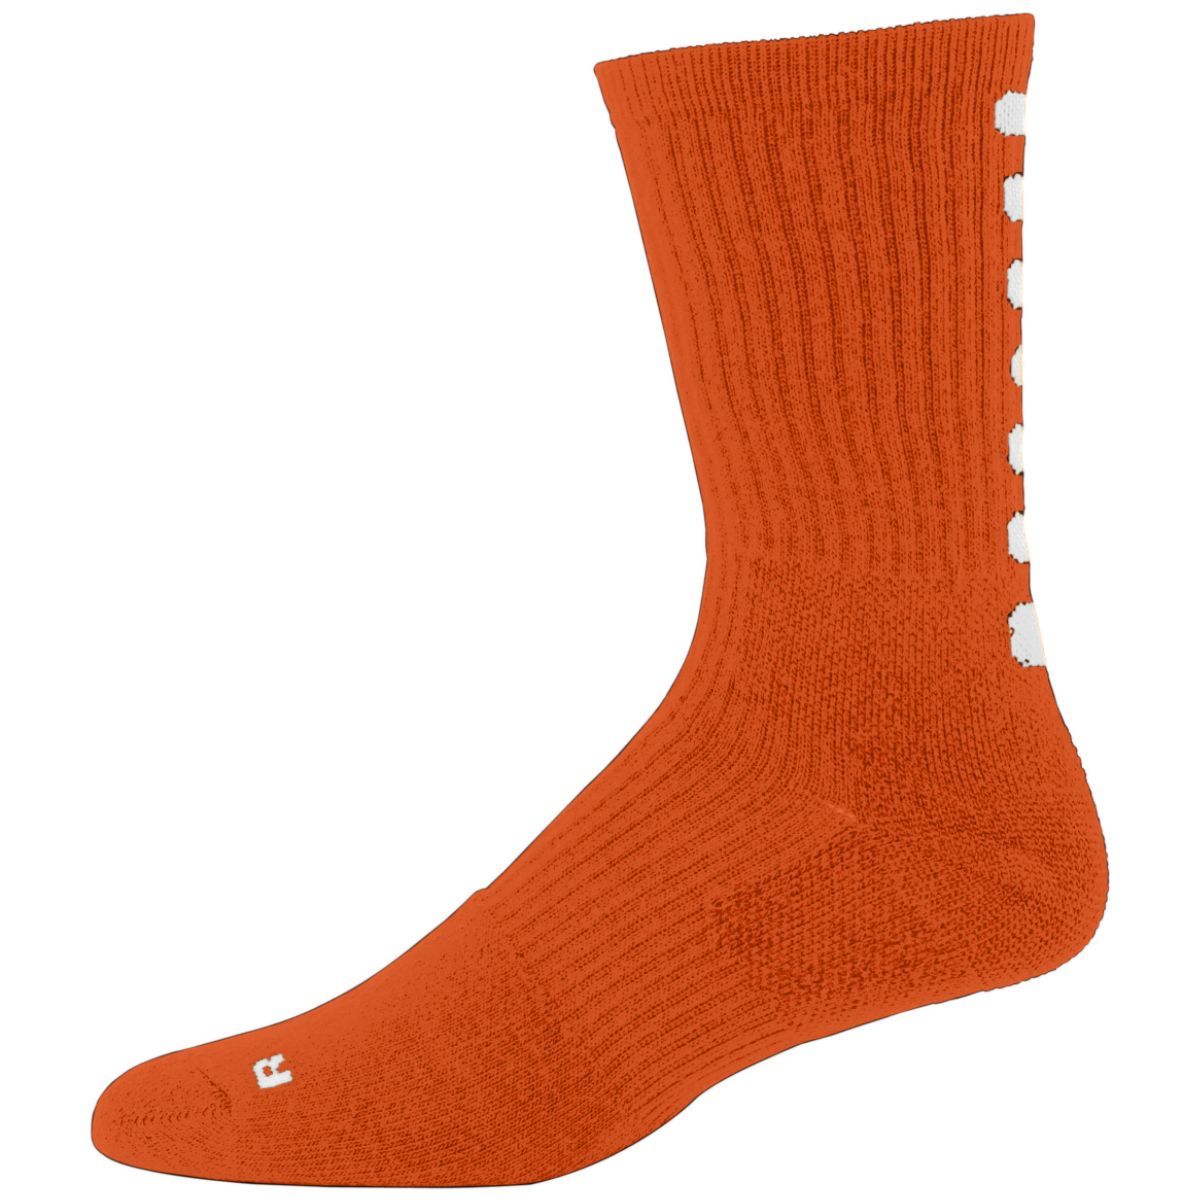 Augusta Sportswear Color Block Crew Sock in Orange/White  -Part of the Adult, Augusta-Products, Accessories-Socks product lines at KanaleyCreations.com